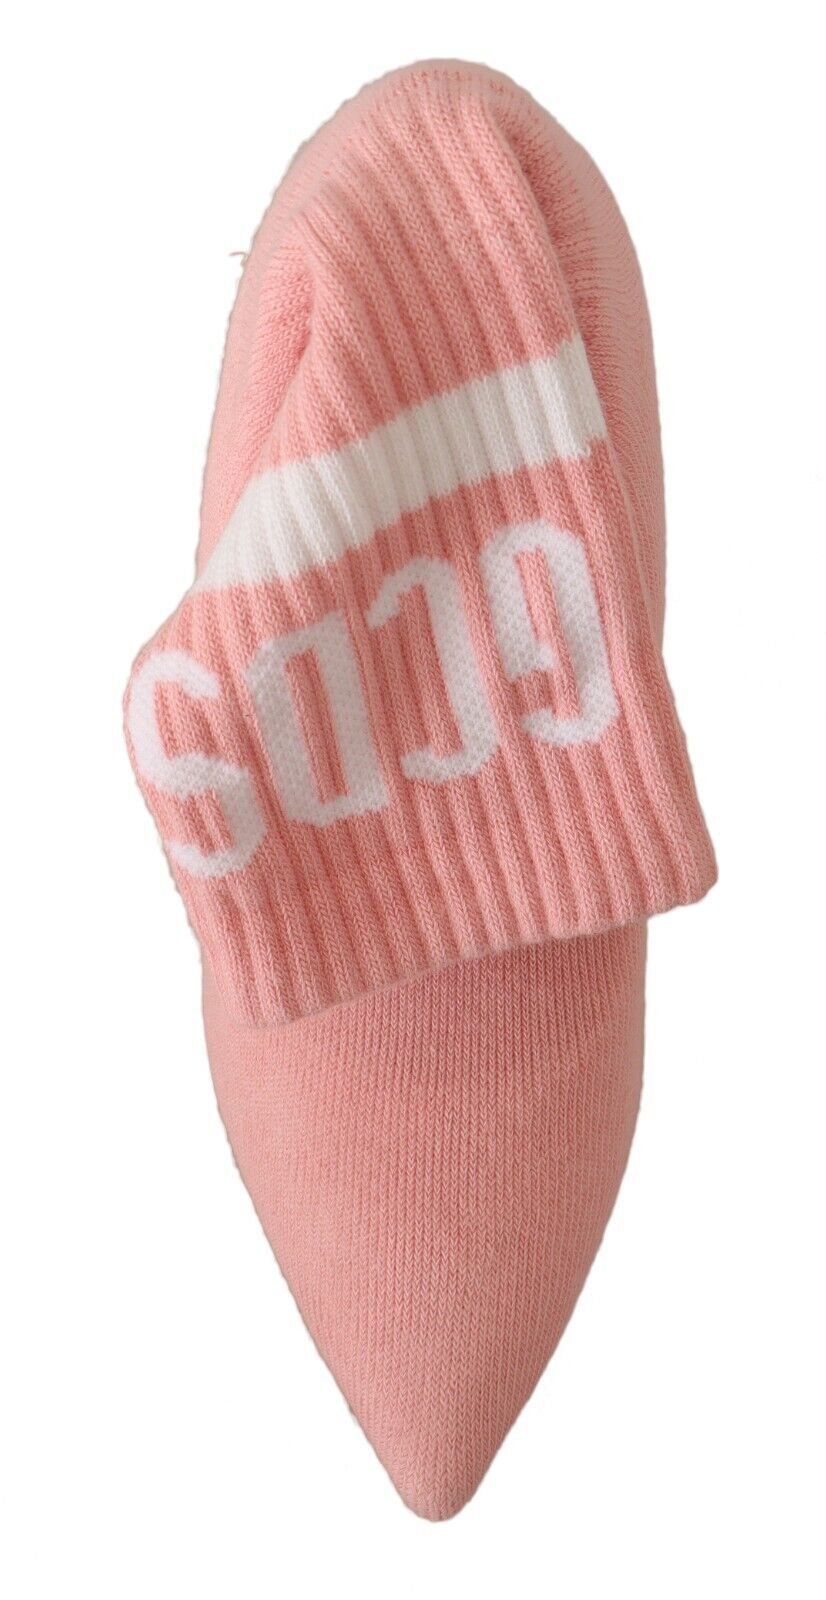 Chic Pink Suede Ankle Boots with Logo Socks